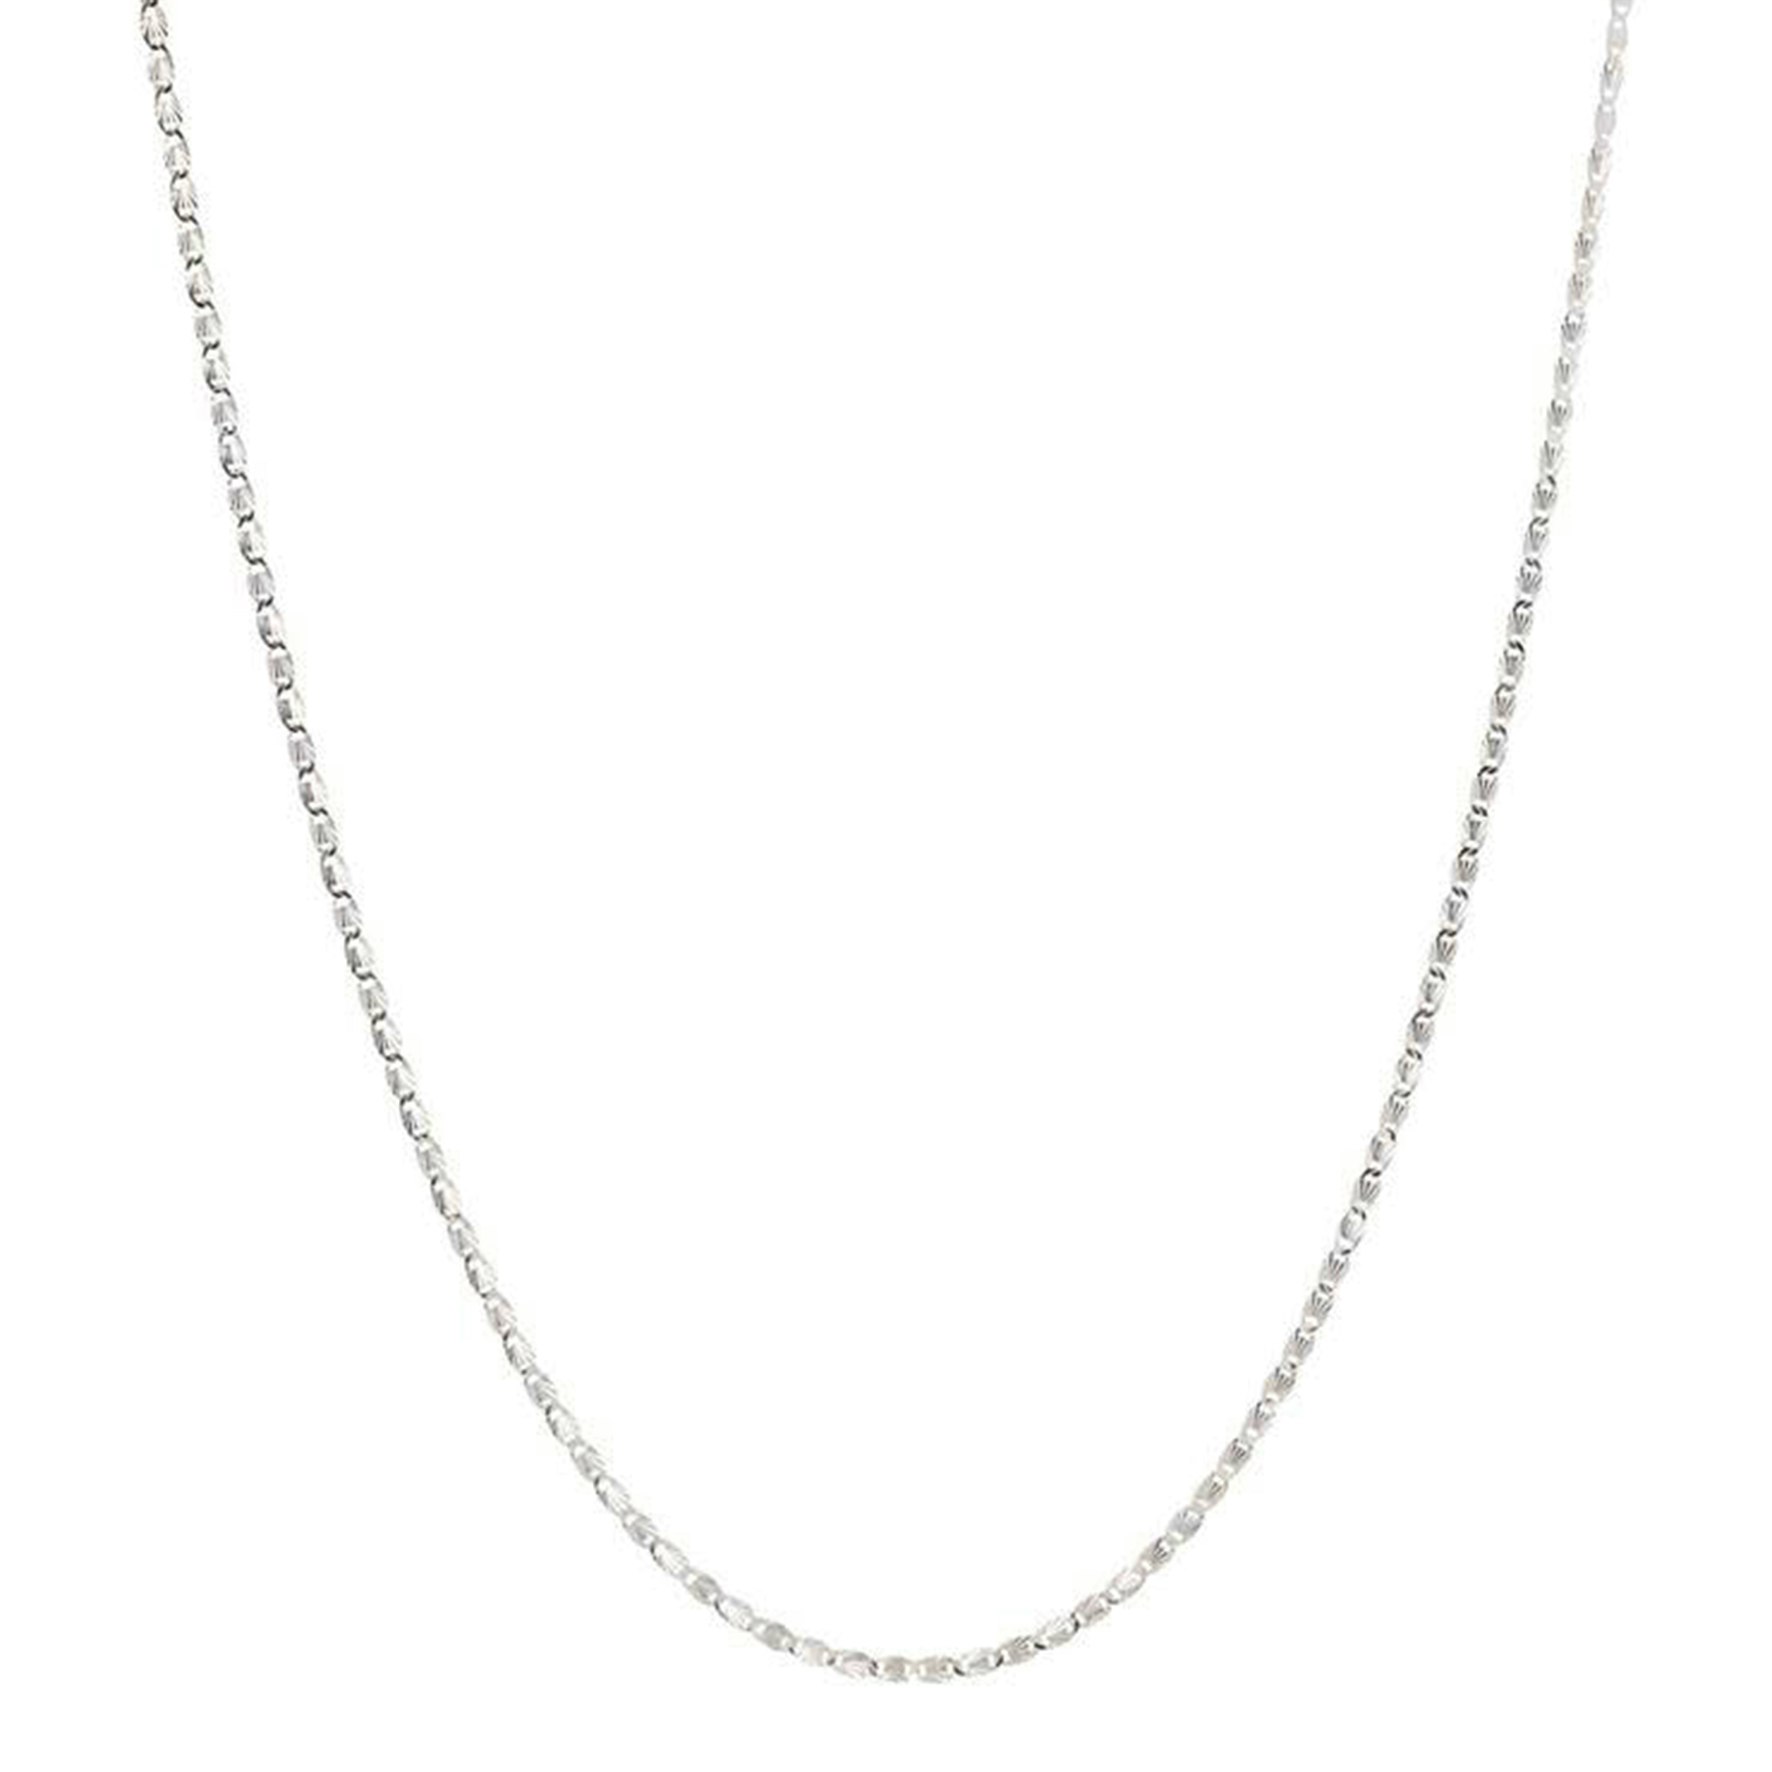 Gilly Necklace von Pico in Silber Sterling 925